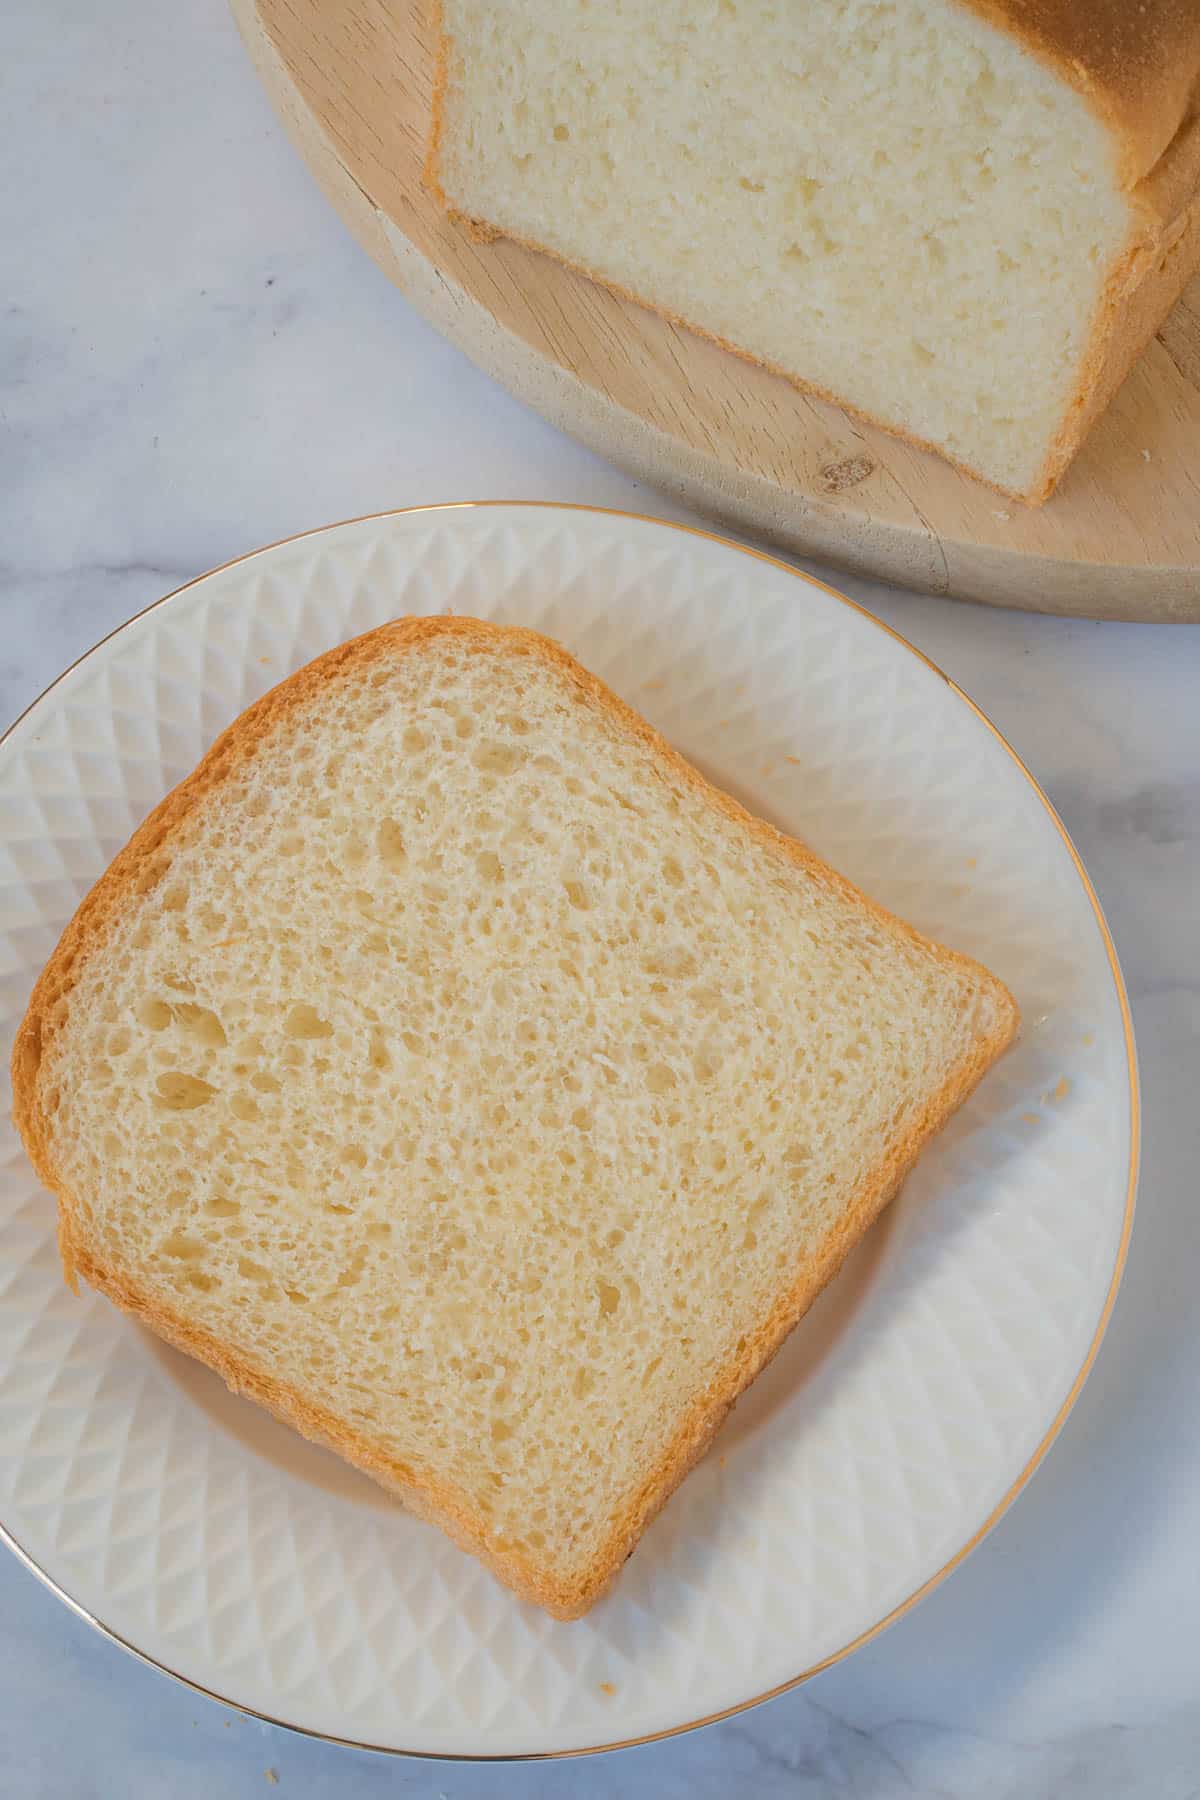 A slice of plain white bread on a white plate